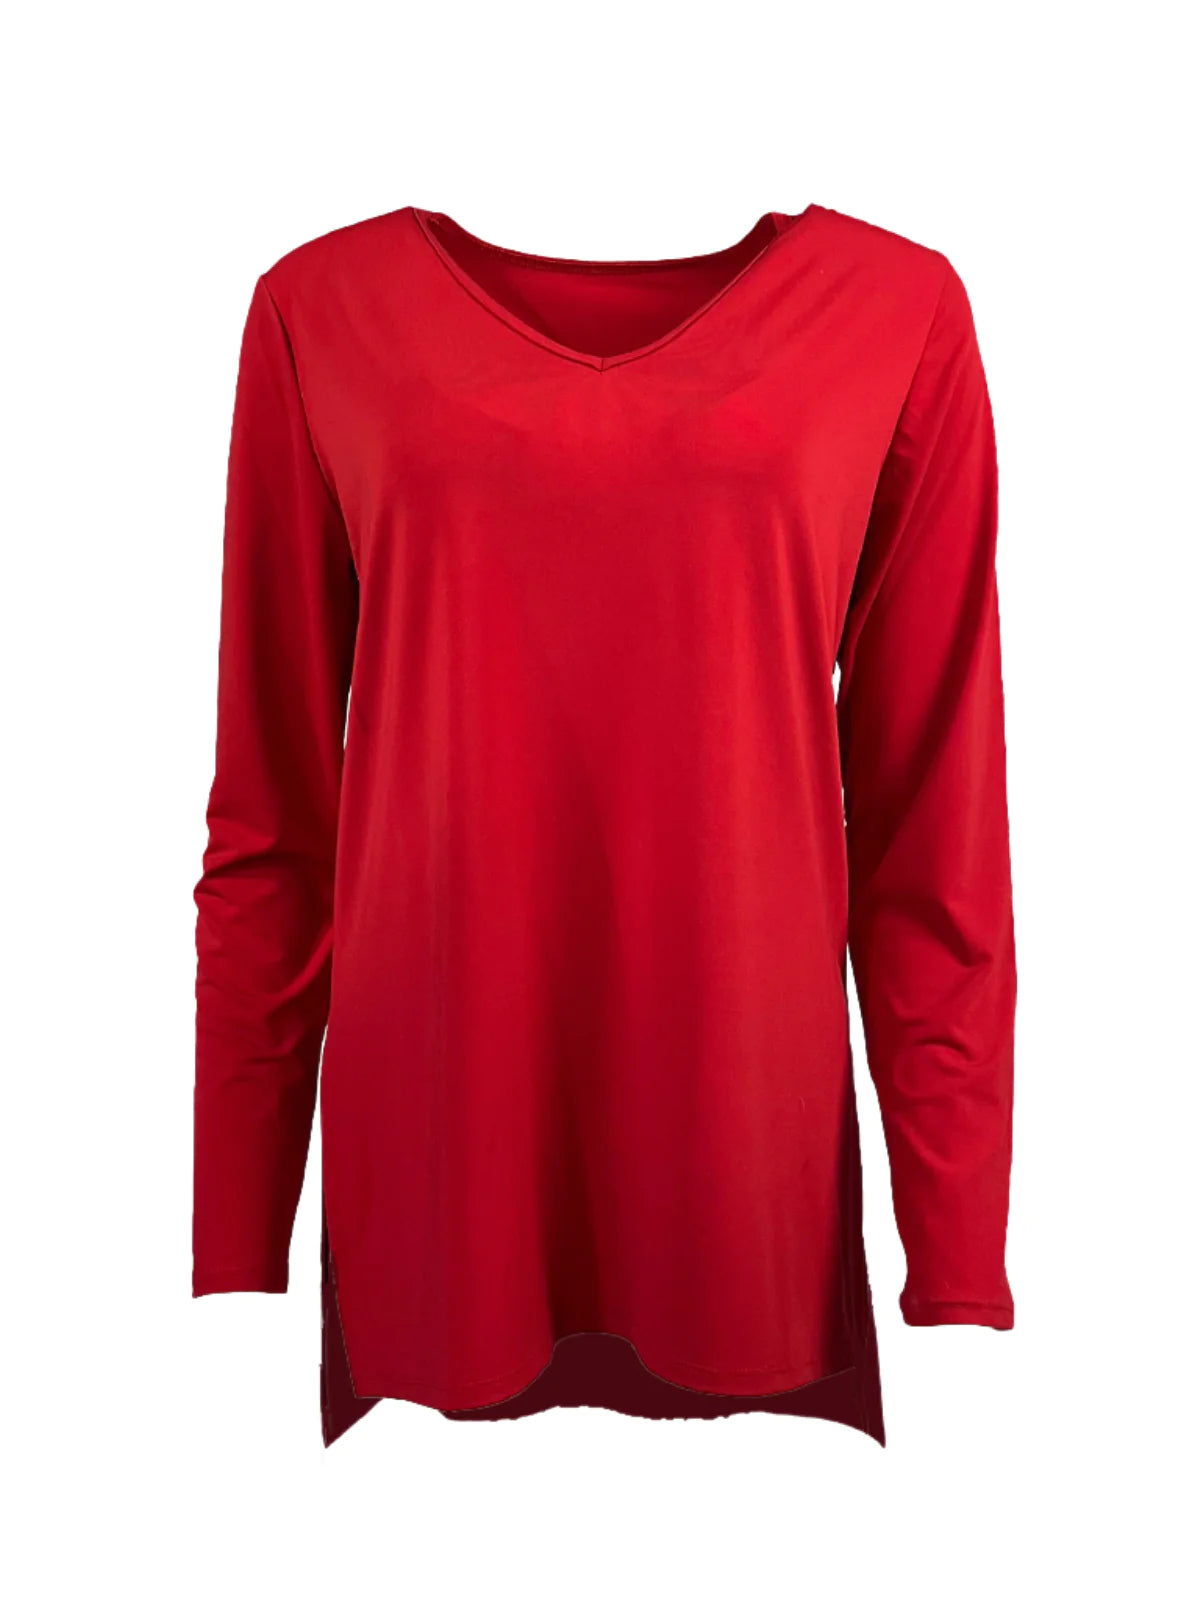 Storyline Collection Hilo Tunic Top